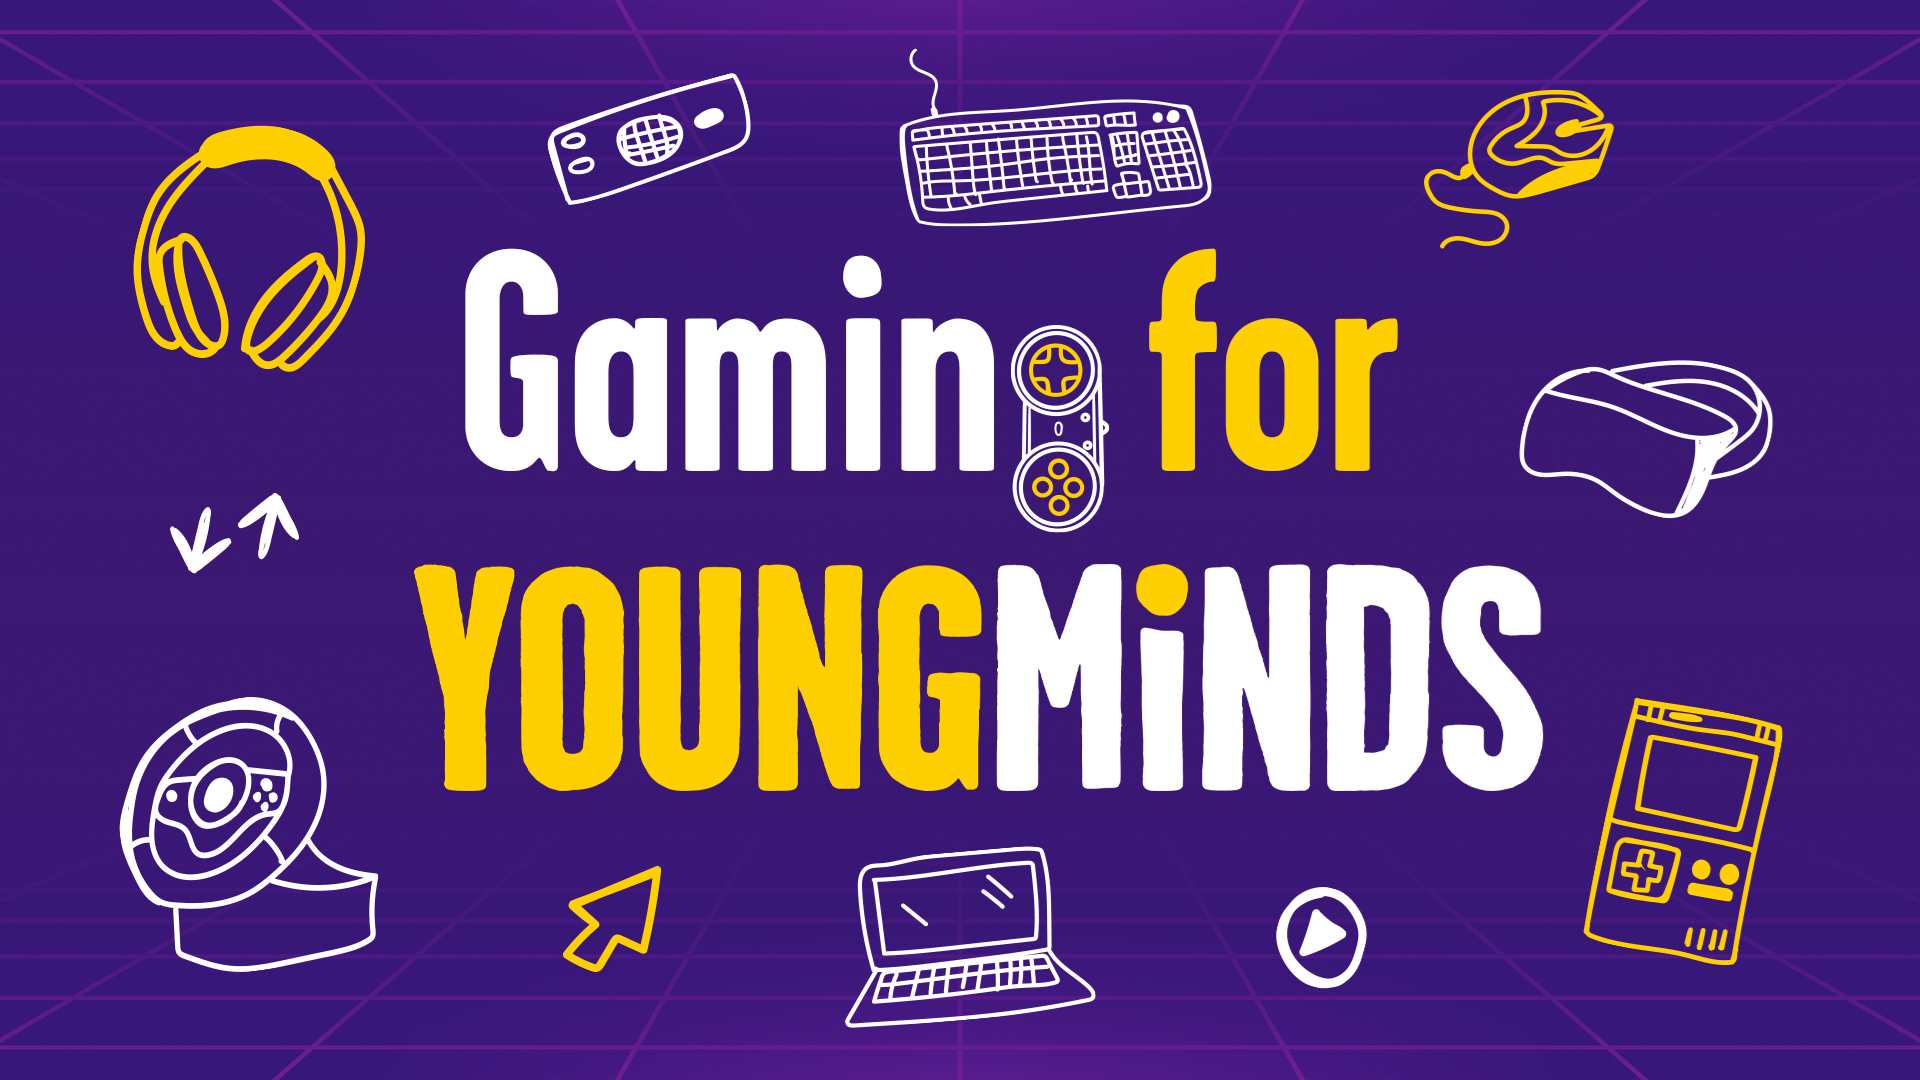 Text reads: 'Gaming for YoungMinds'.